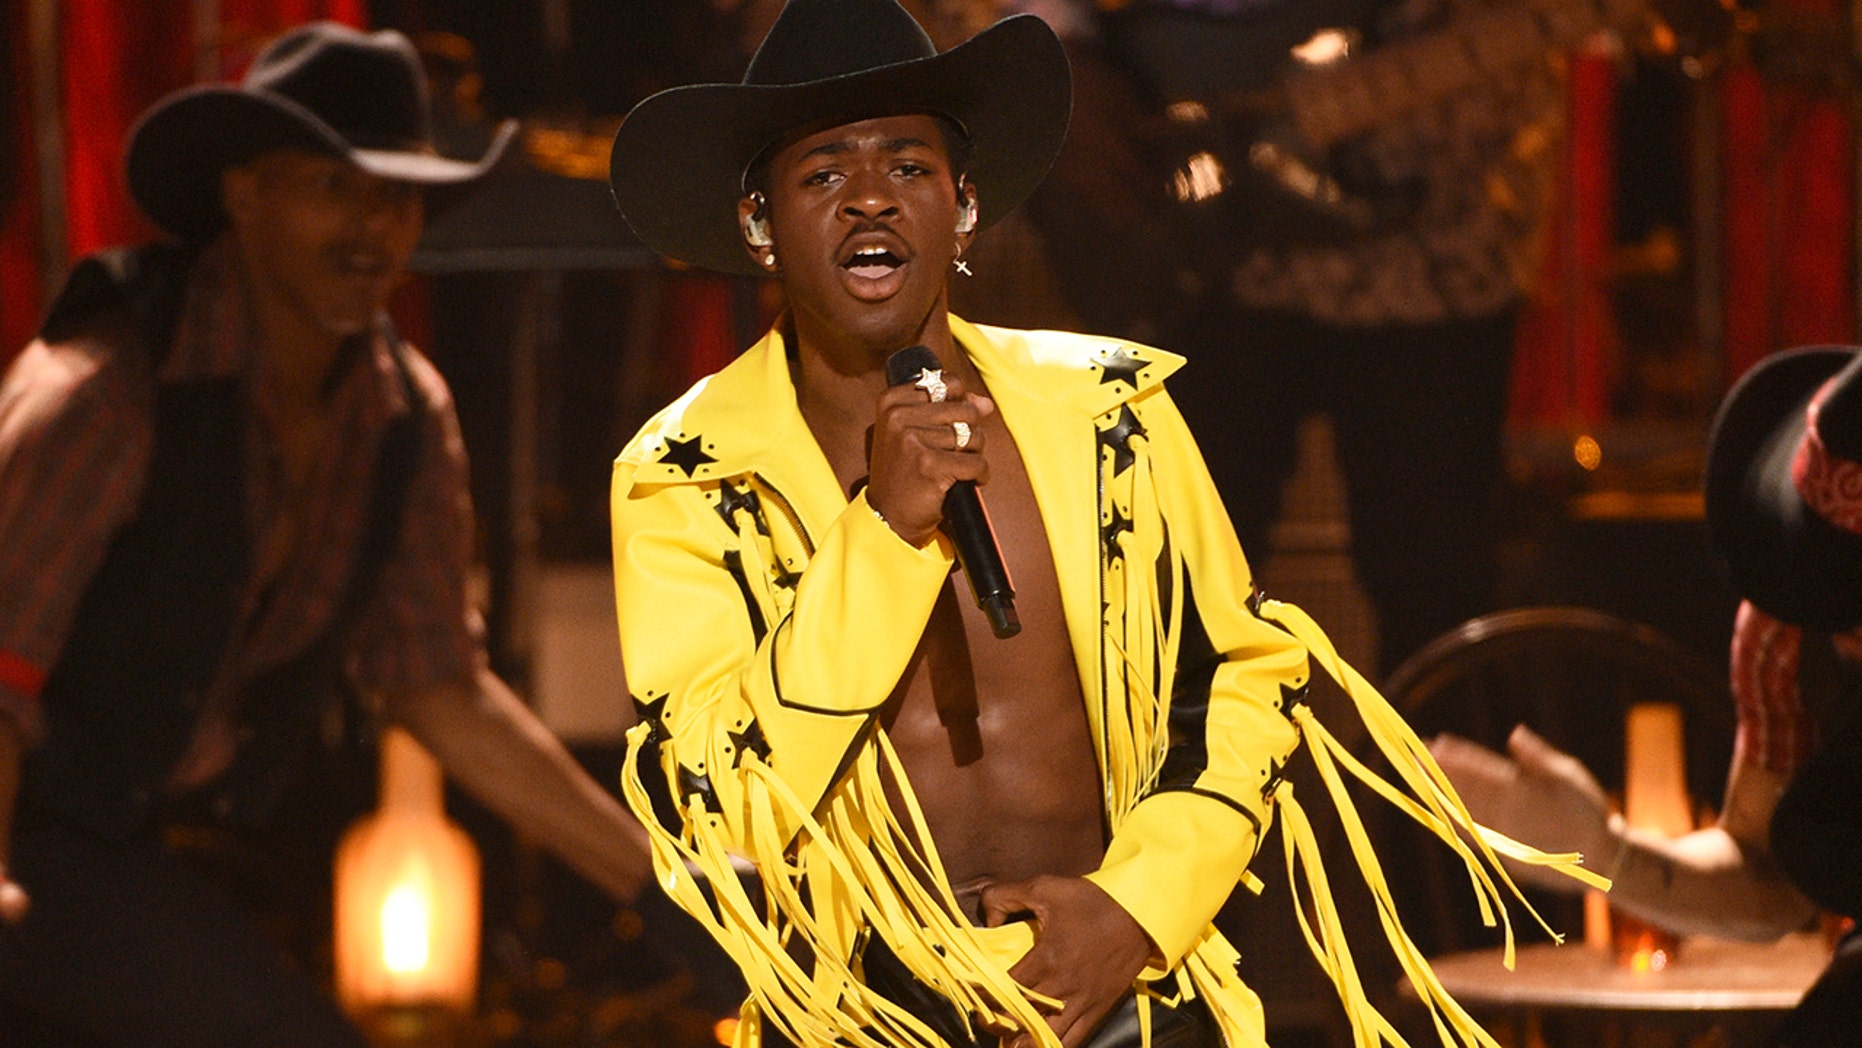 Lil Nas X performs "Old Town Road" at the BET Awards on Sunday, June 23, 2019, at the Microsoft Theater in Los Angeles. (Photo by Chris Pizzello/Invision/AP)